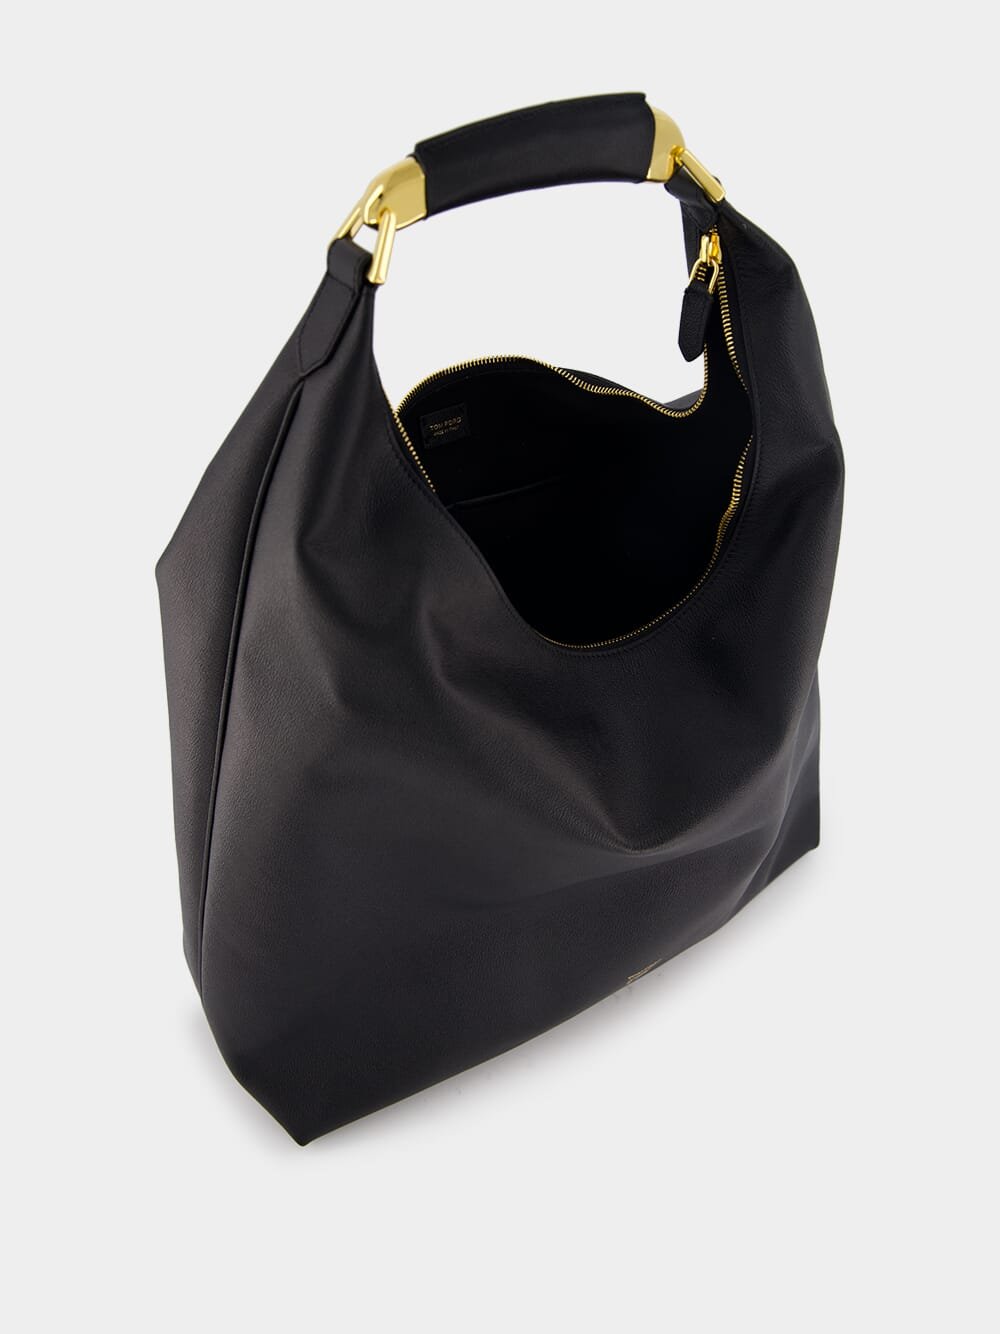 Tom FordGrain Leather Bianca Large Hobo at Fashion Clinic